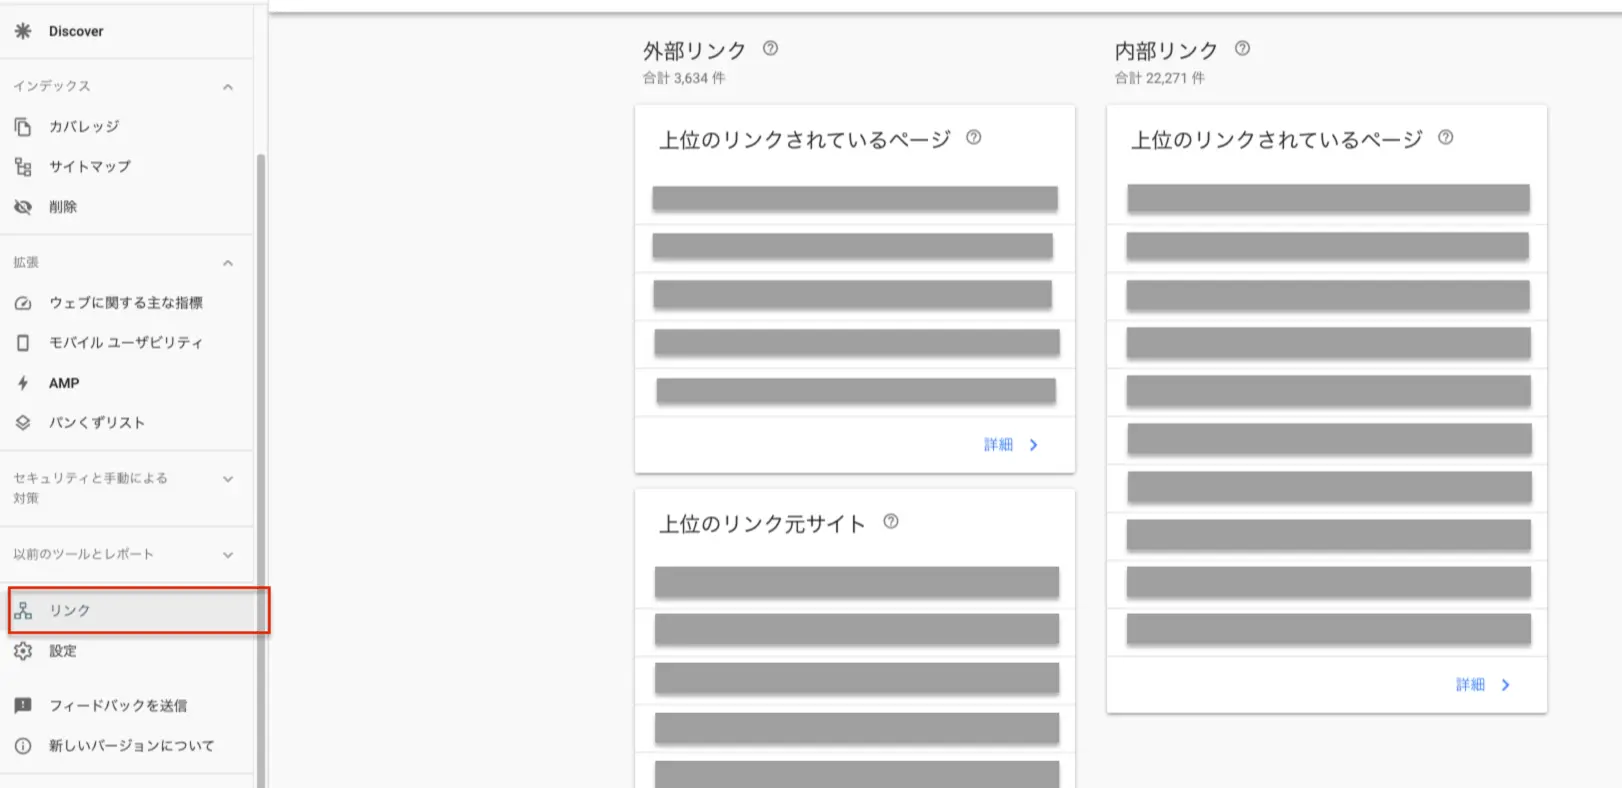 1.Google Search Consoleにログインする